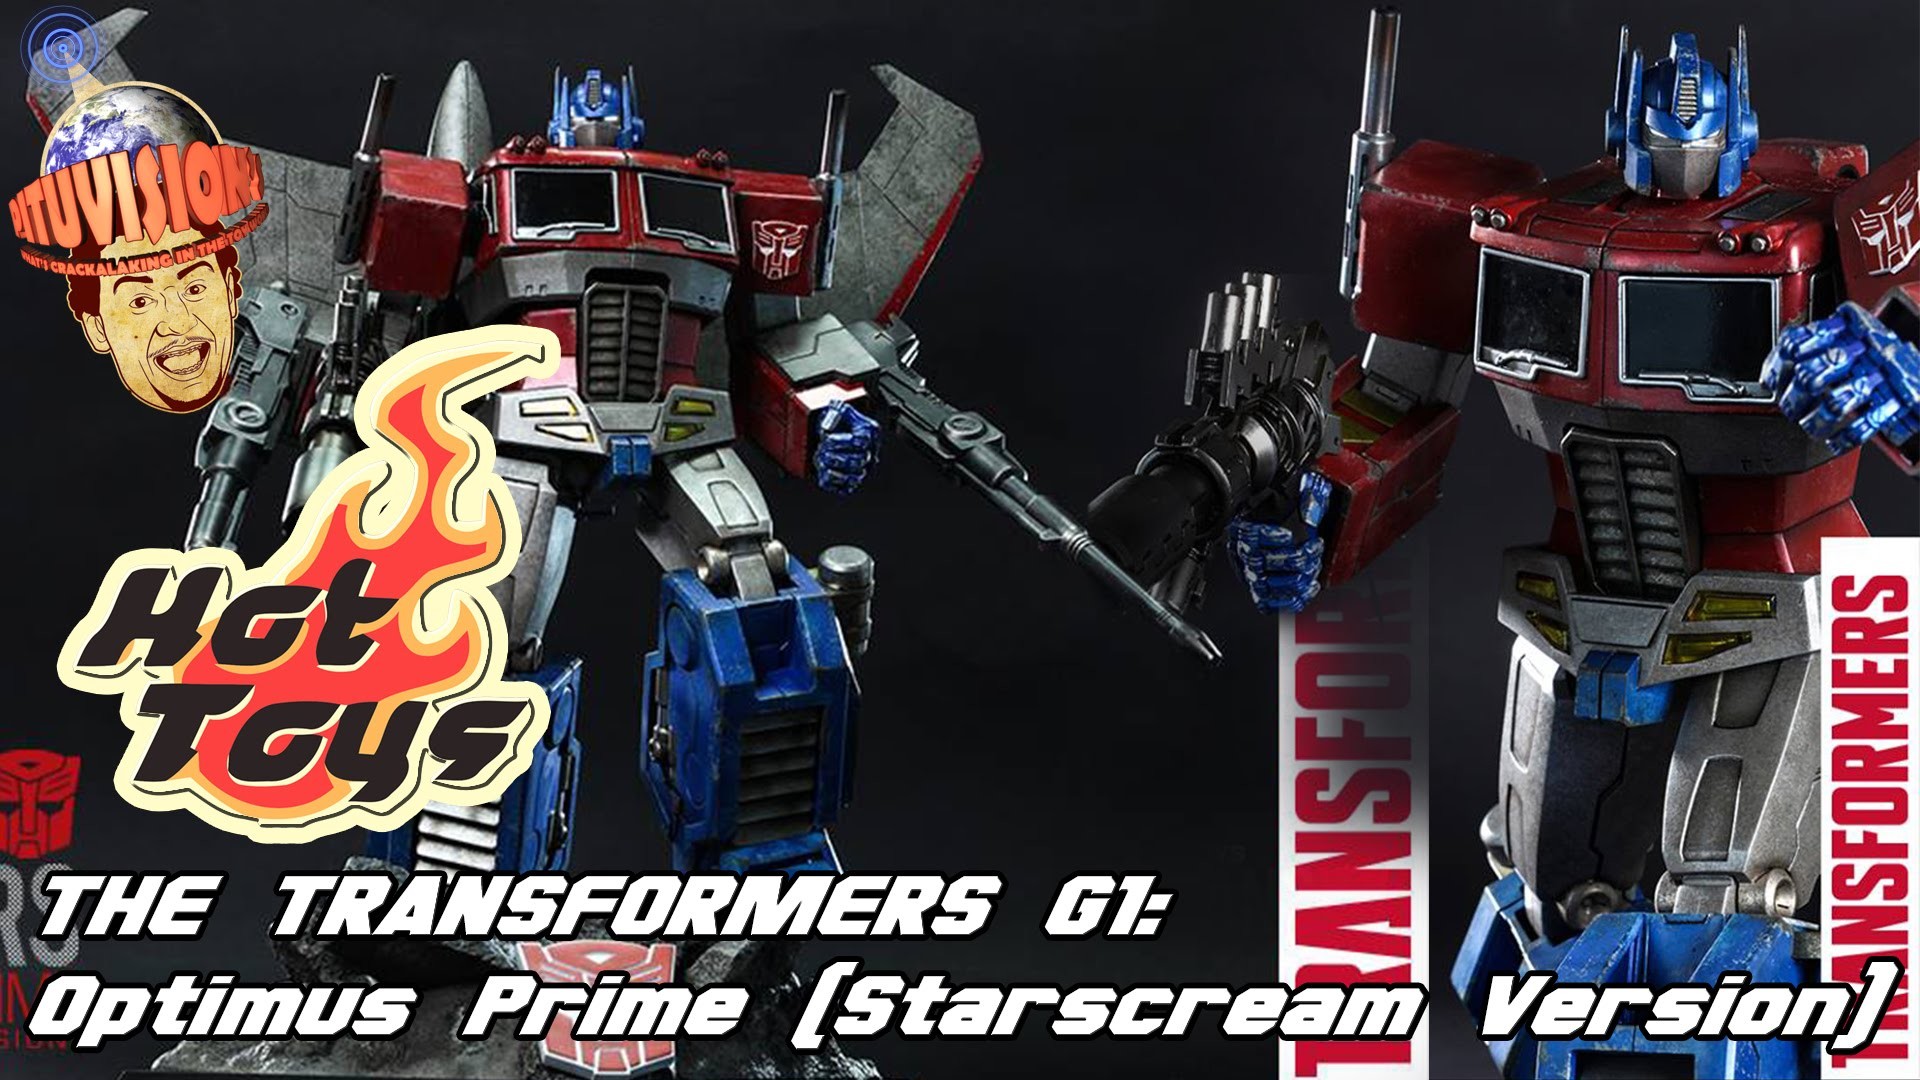 1920x1080 Hot Toys Transformers G1 Optimus Prime Starscream Version Up For PreOrder!  - YouTube